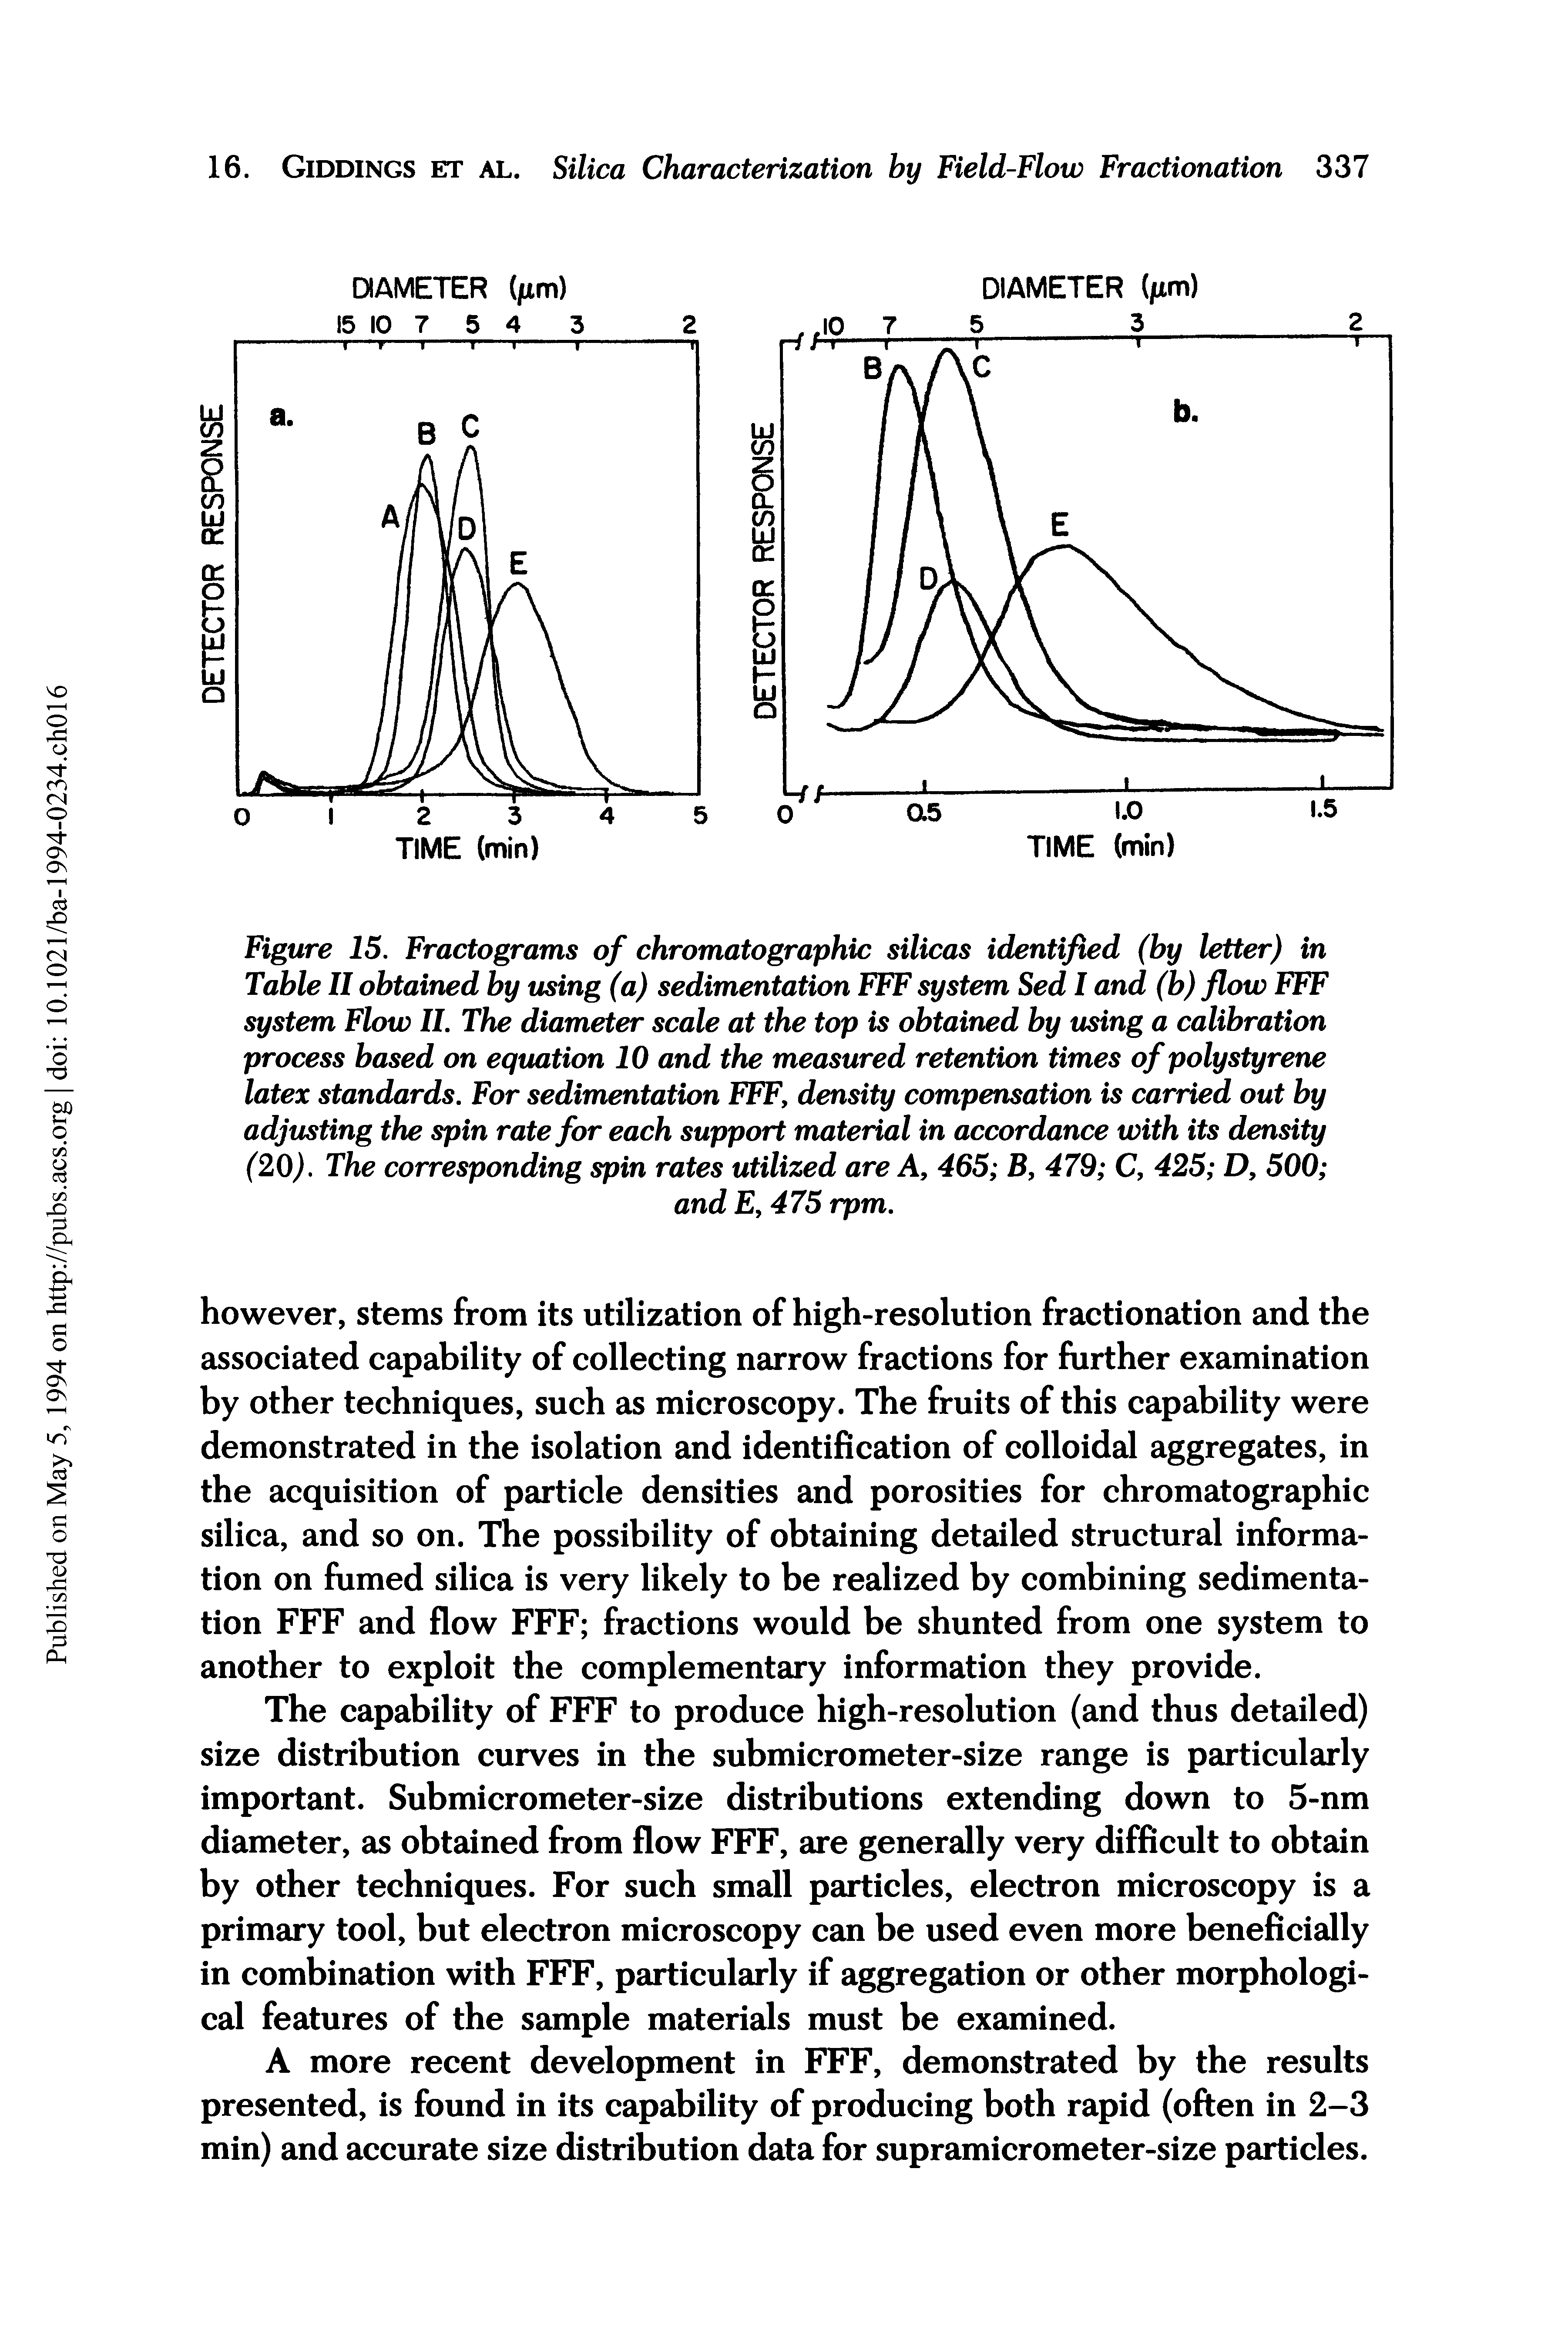 Figure 15. Fractograms of chromatographic silicas identified (by letter) in Table 11 obtained by using (a) sedimentation FFF system Sed 1 and (b) flow FFF system Flow II. The diameter scale at the top is obtained by using a calibration process based on equation 10 and the measured retention times of polystyrene latex standards. For sedimentation FFF, density compensation is carried out by adjusting the spin rate for each support material in accordance with its density (20). The corresponding spin rates utilized are A, 465 B, 479 C, 425 D, 500 ...